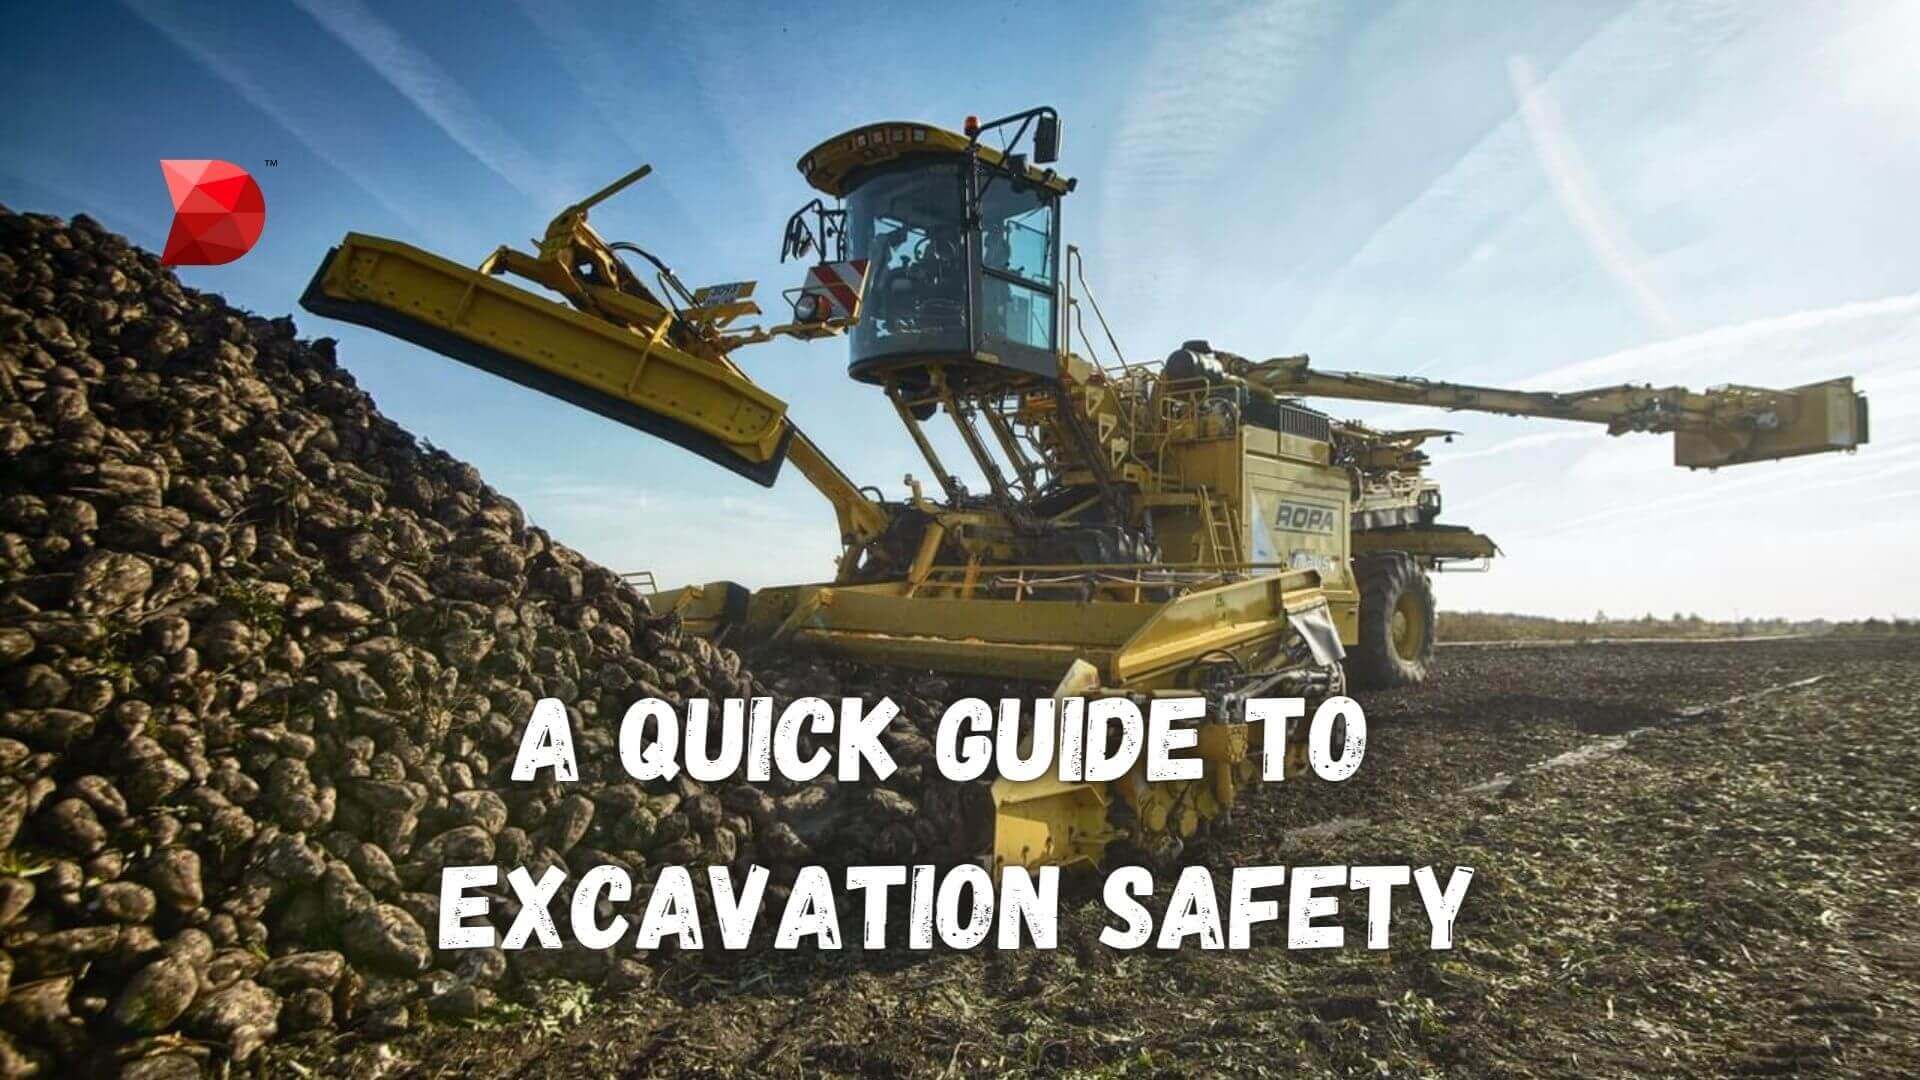 A Quick Guide to Excavation Safety